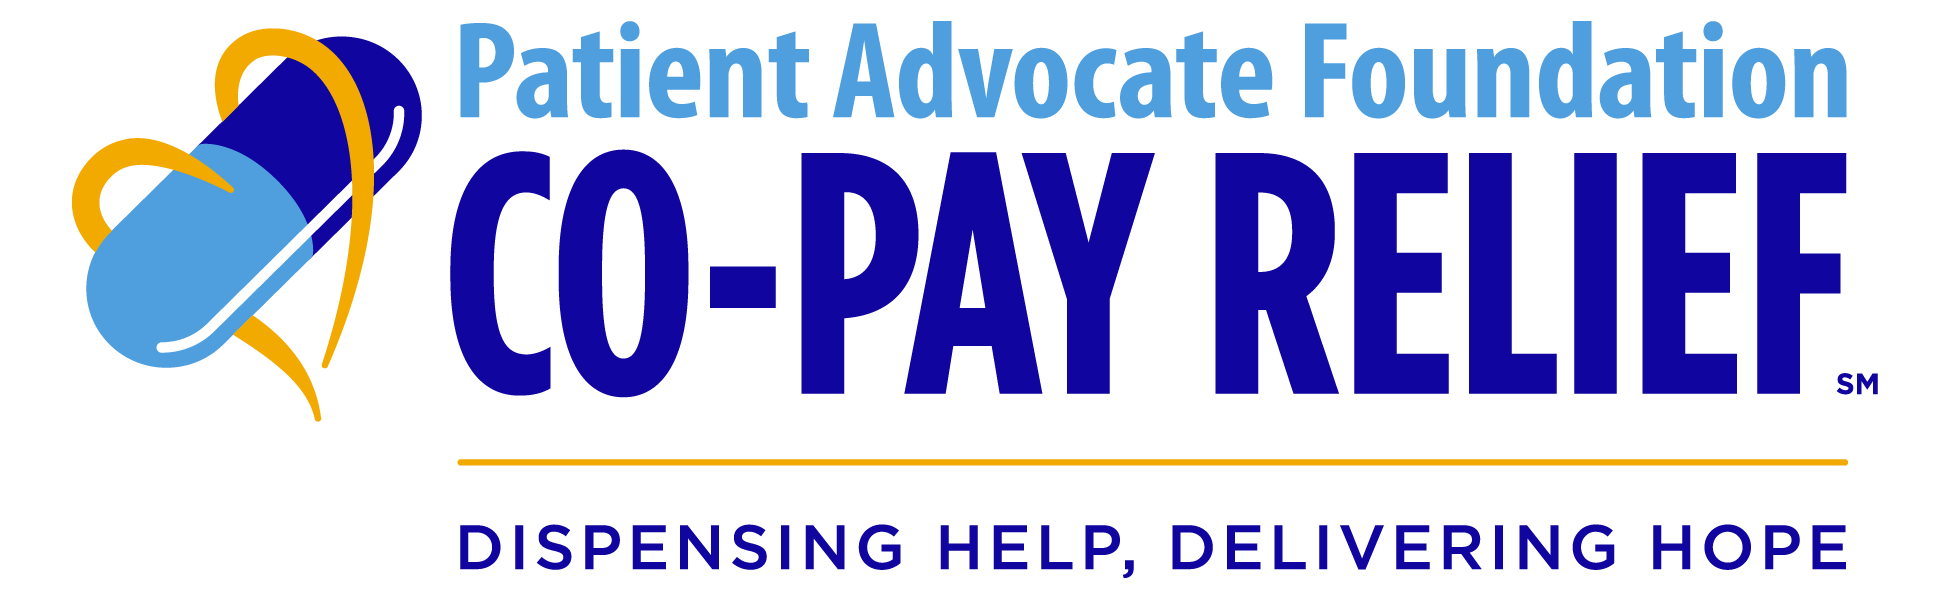 Patient Advocate Foundation Co-Pay Relief